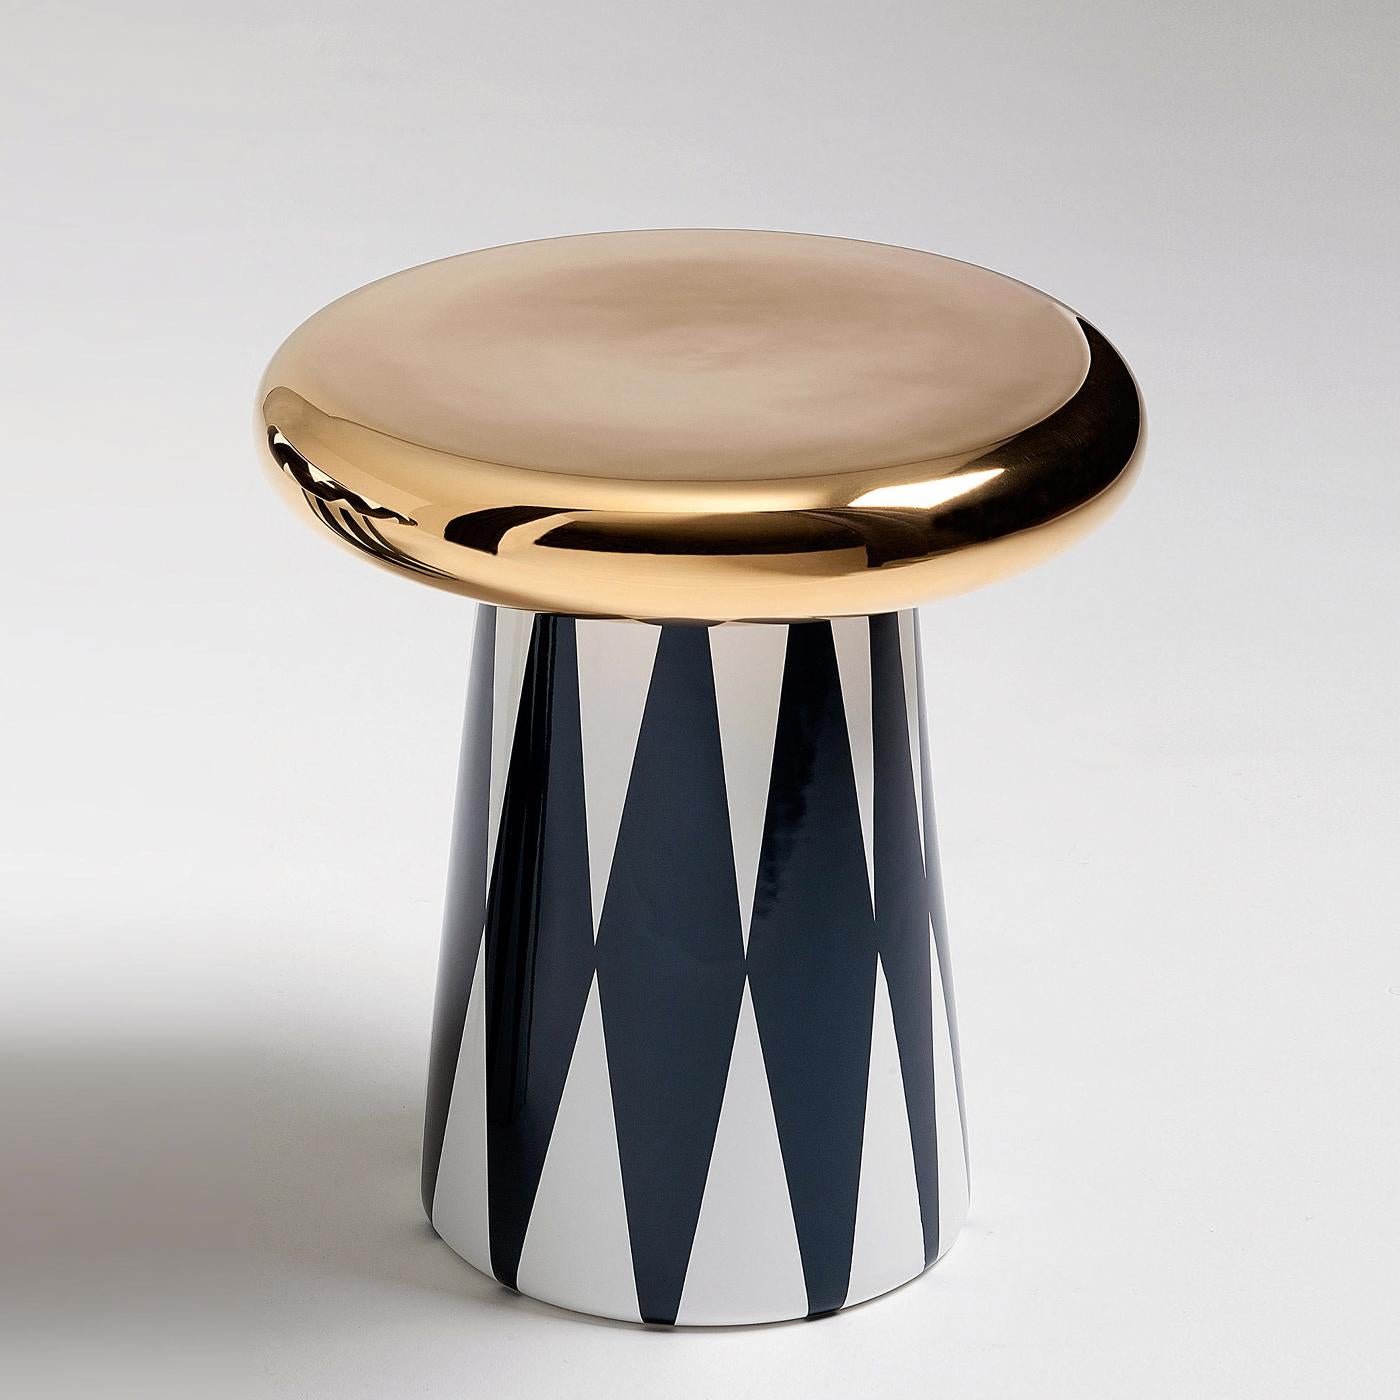 Circus Zebra side table all in hand-crafted 
ceramic in lacquered finish, made in Itlay.